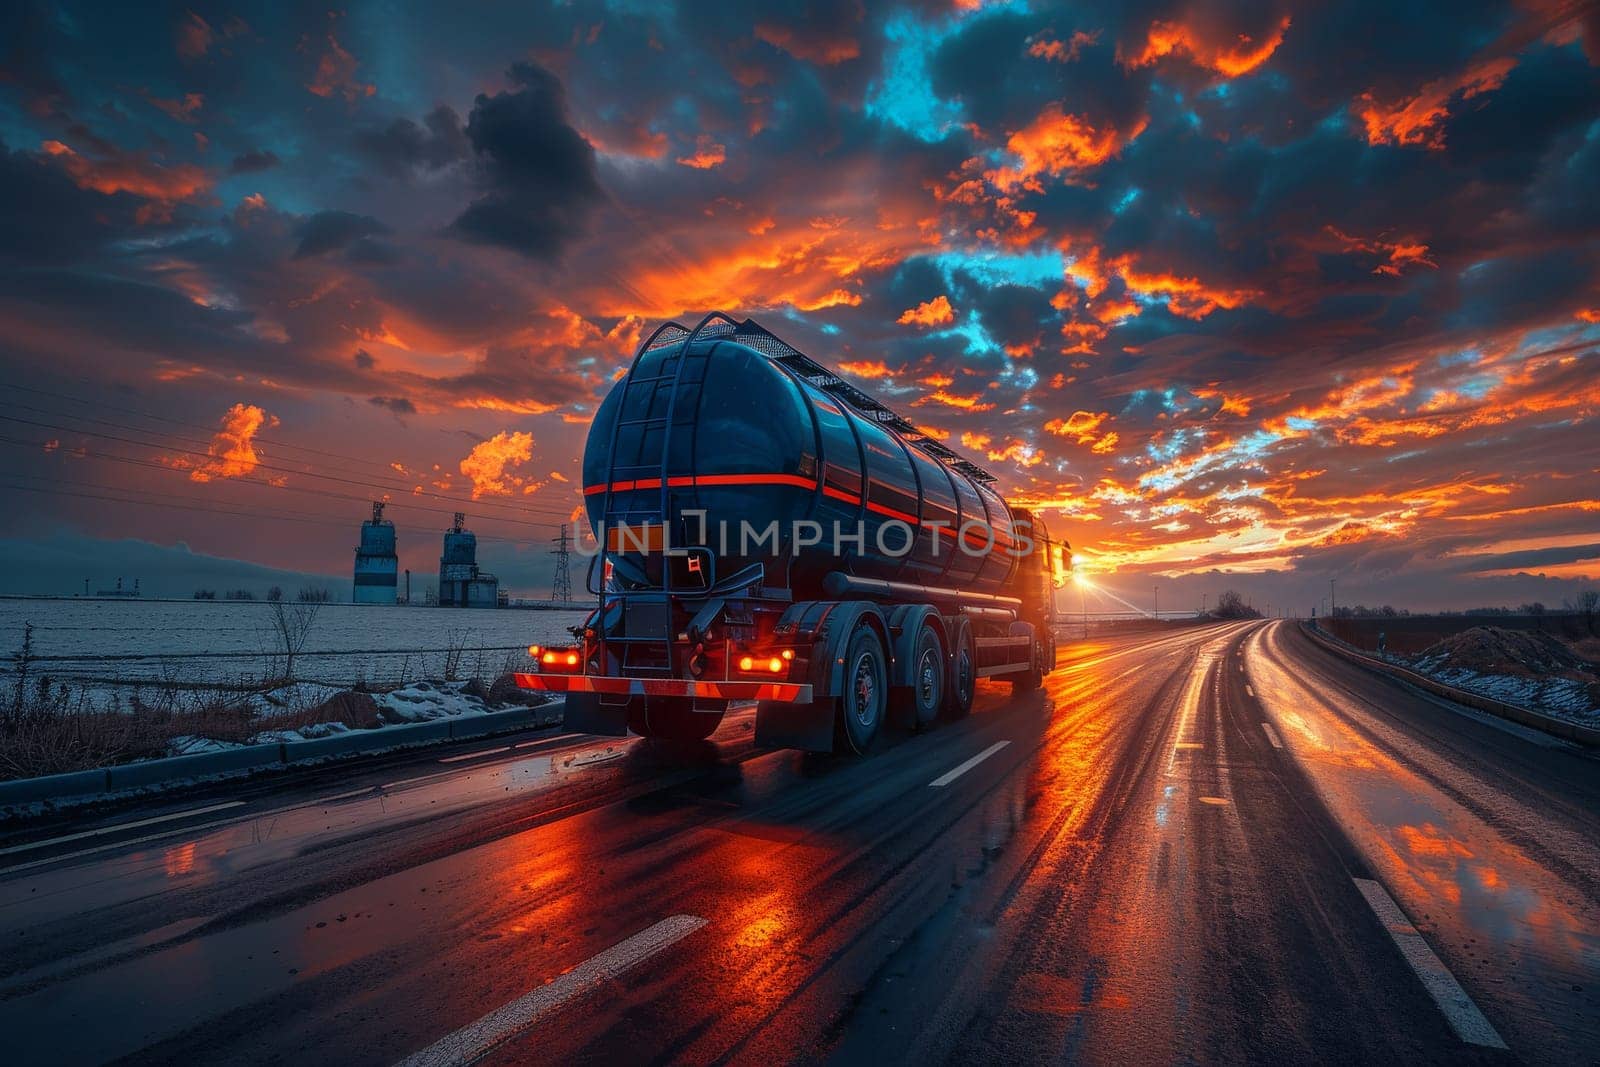 A large tanker truck is driving down a road near a refinery. The sky is orange and the sun is setting